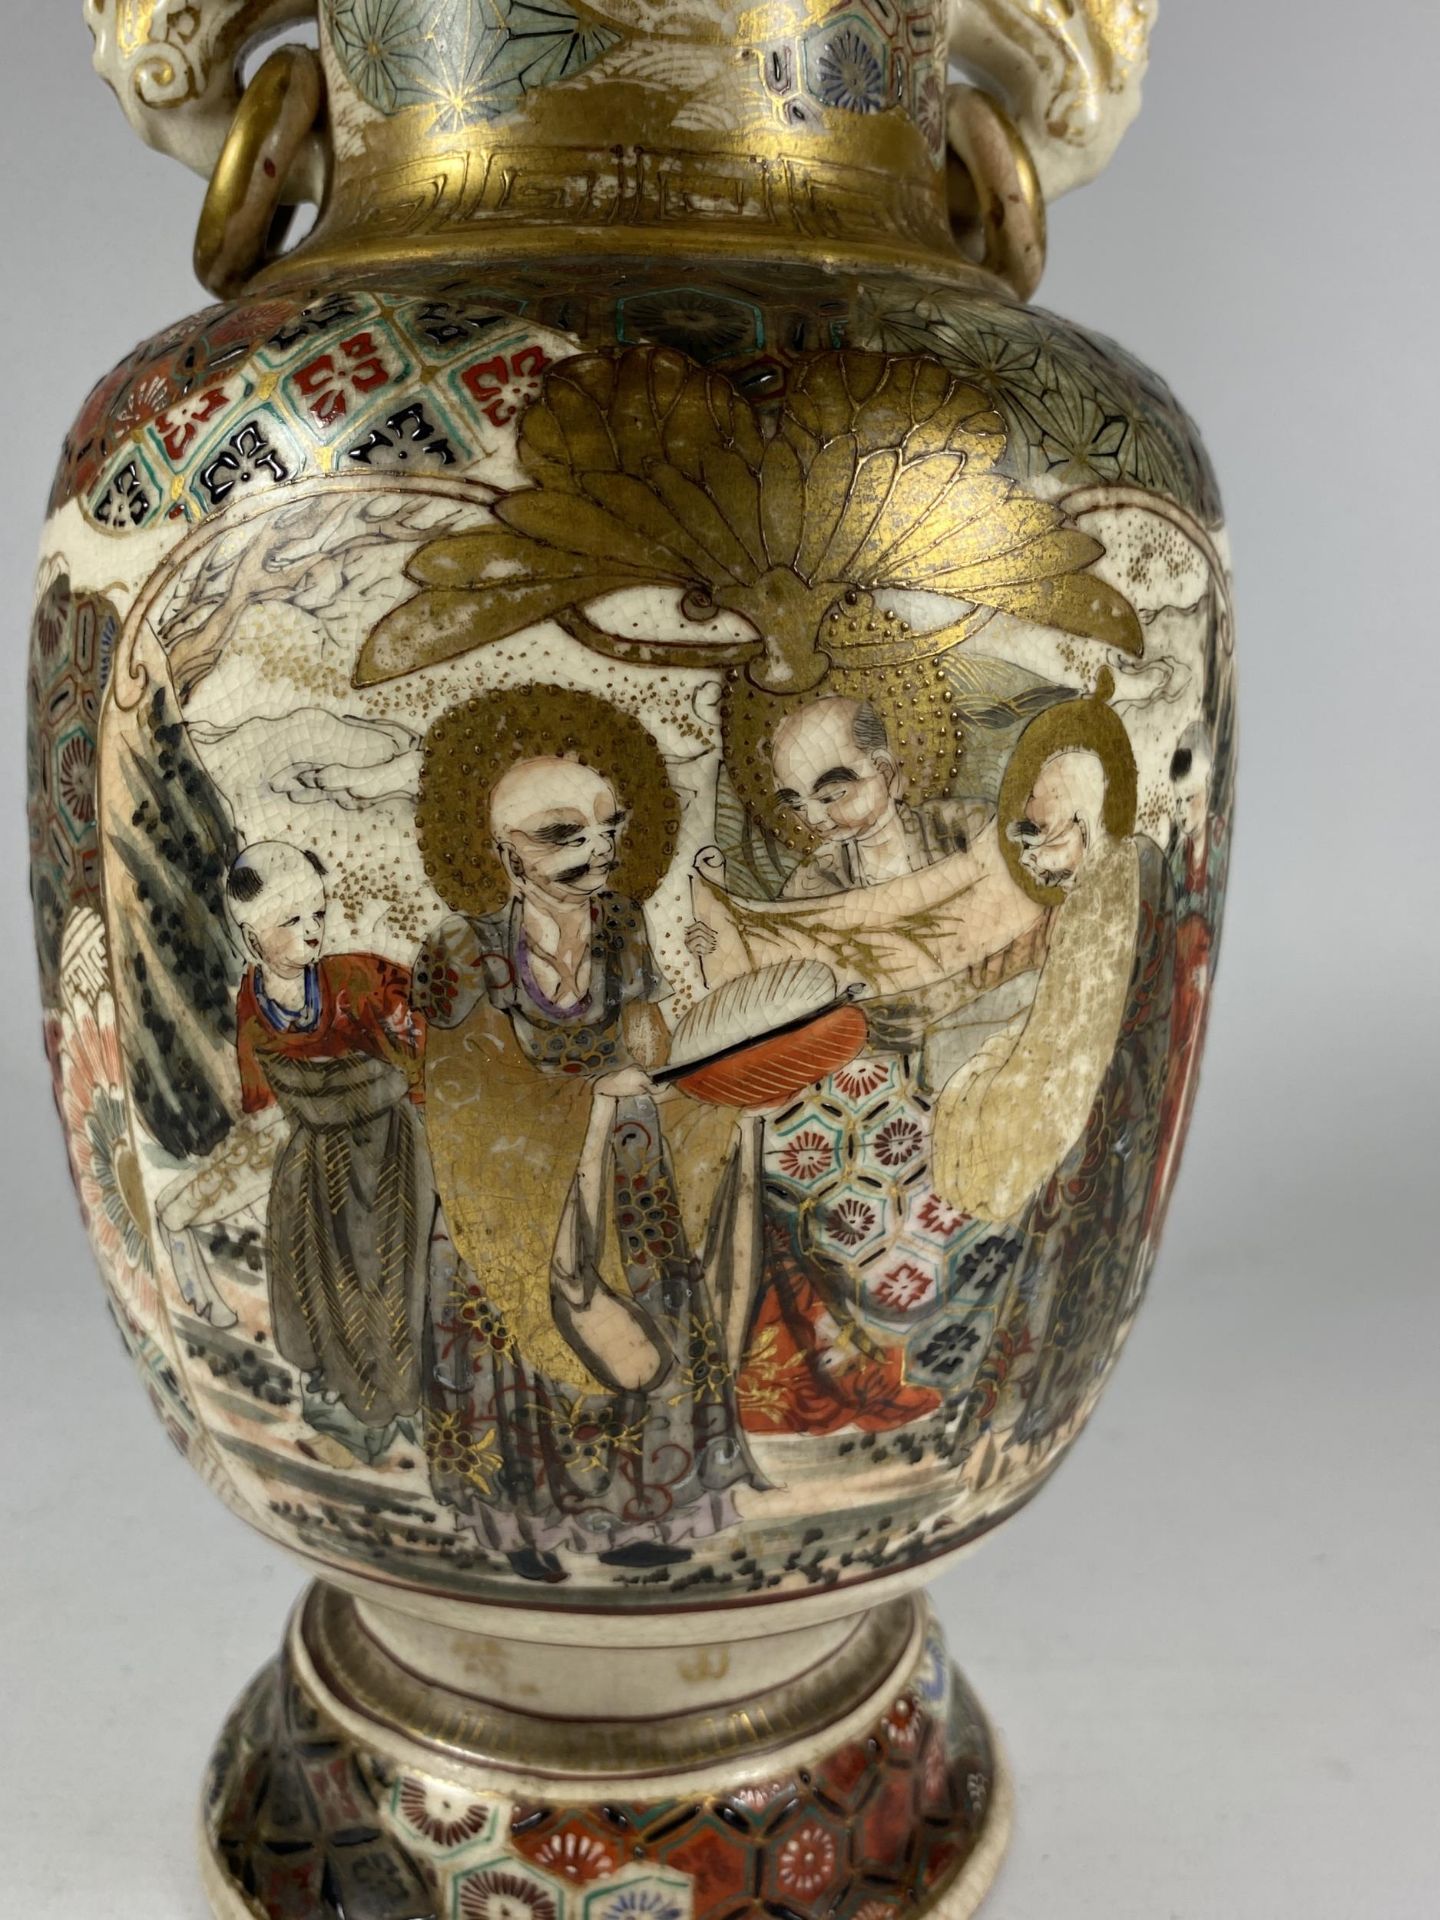 A JAPANESE MEIJI PERIOD (1868-1912) SATSUMA POTTERY TWIN HANDLED VASE WITH FIGURAL SCHOLAR DESIGN, - Image 2 of 5